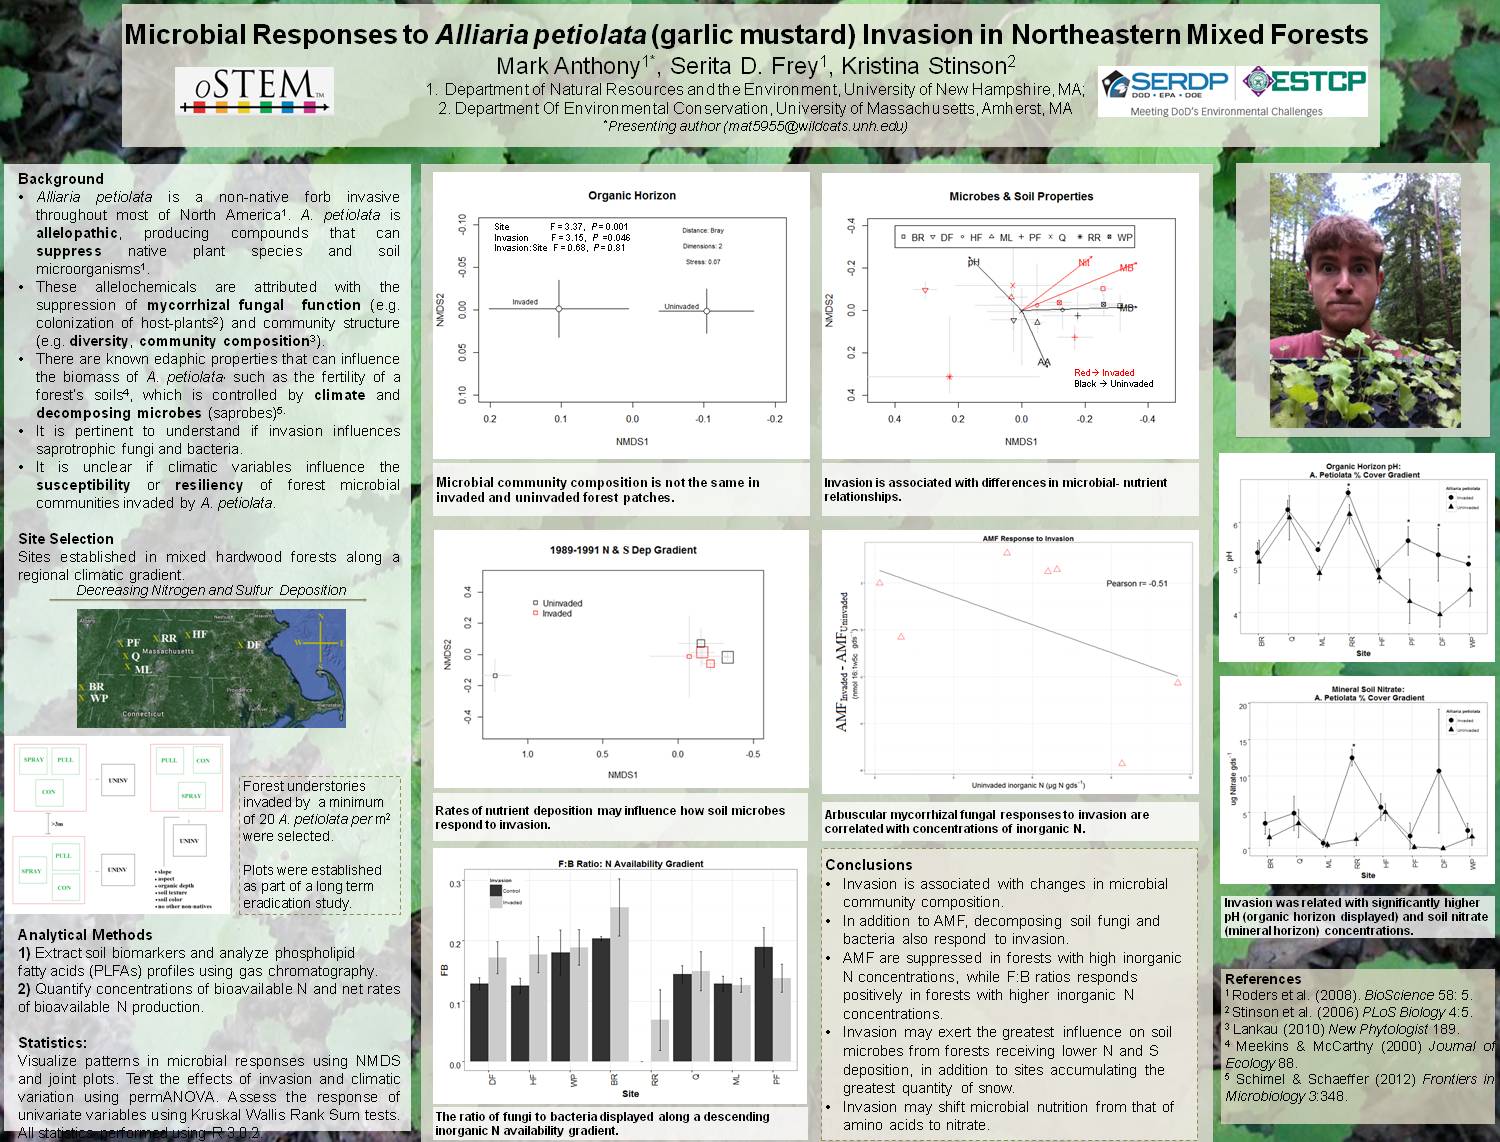 Microbial Responses To Alliaria Petiolata (Garlic Mustard) Invasion In Northeastern Mixed Forests by mat5955